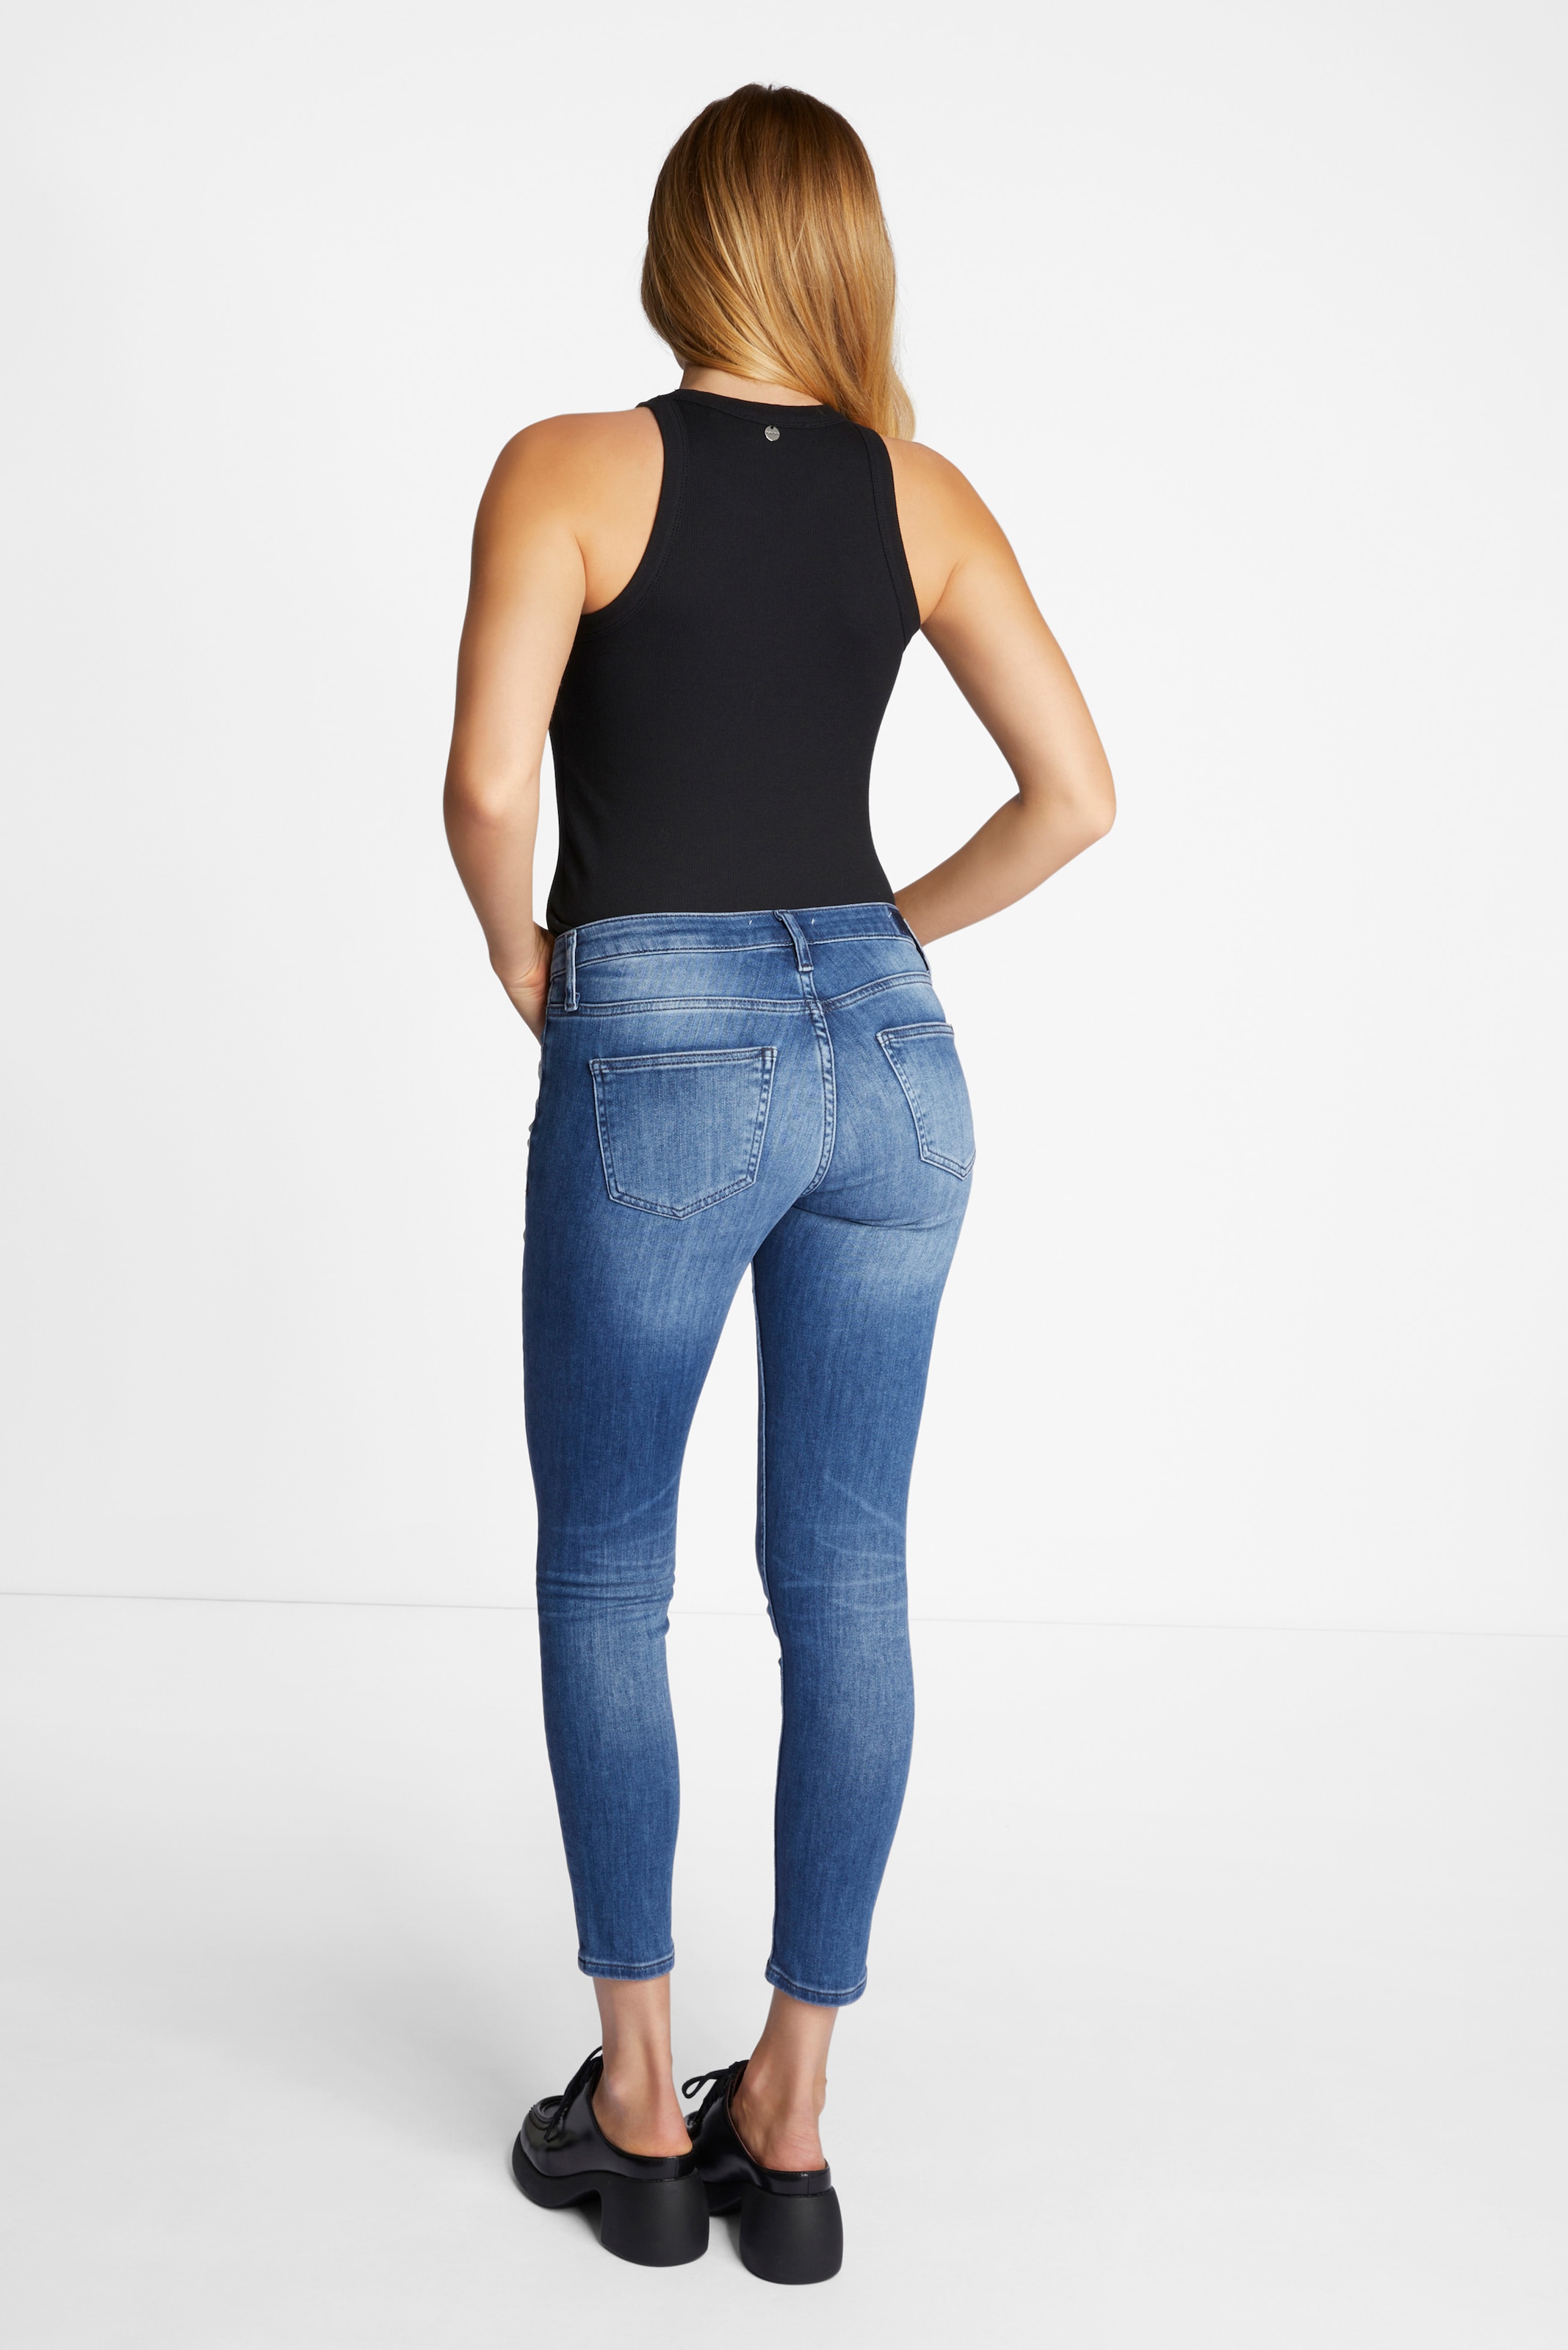 Rich & Royal Skinny-fit-Jeans, in schmaler Passform